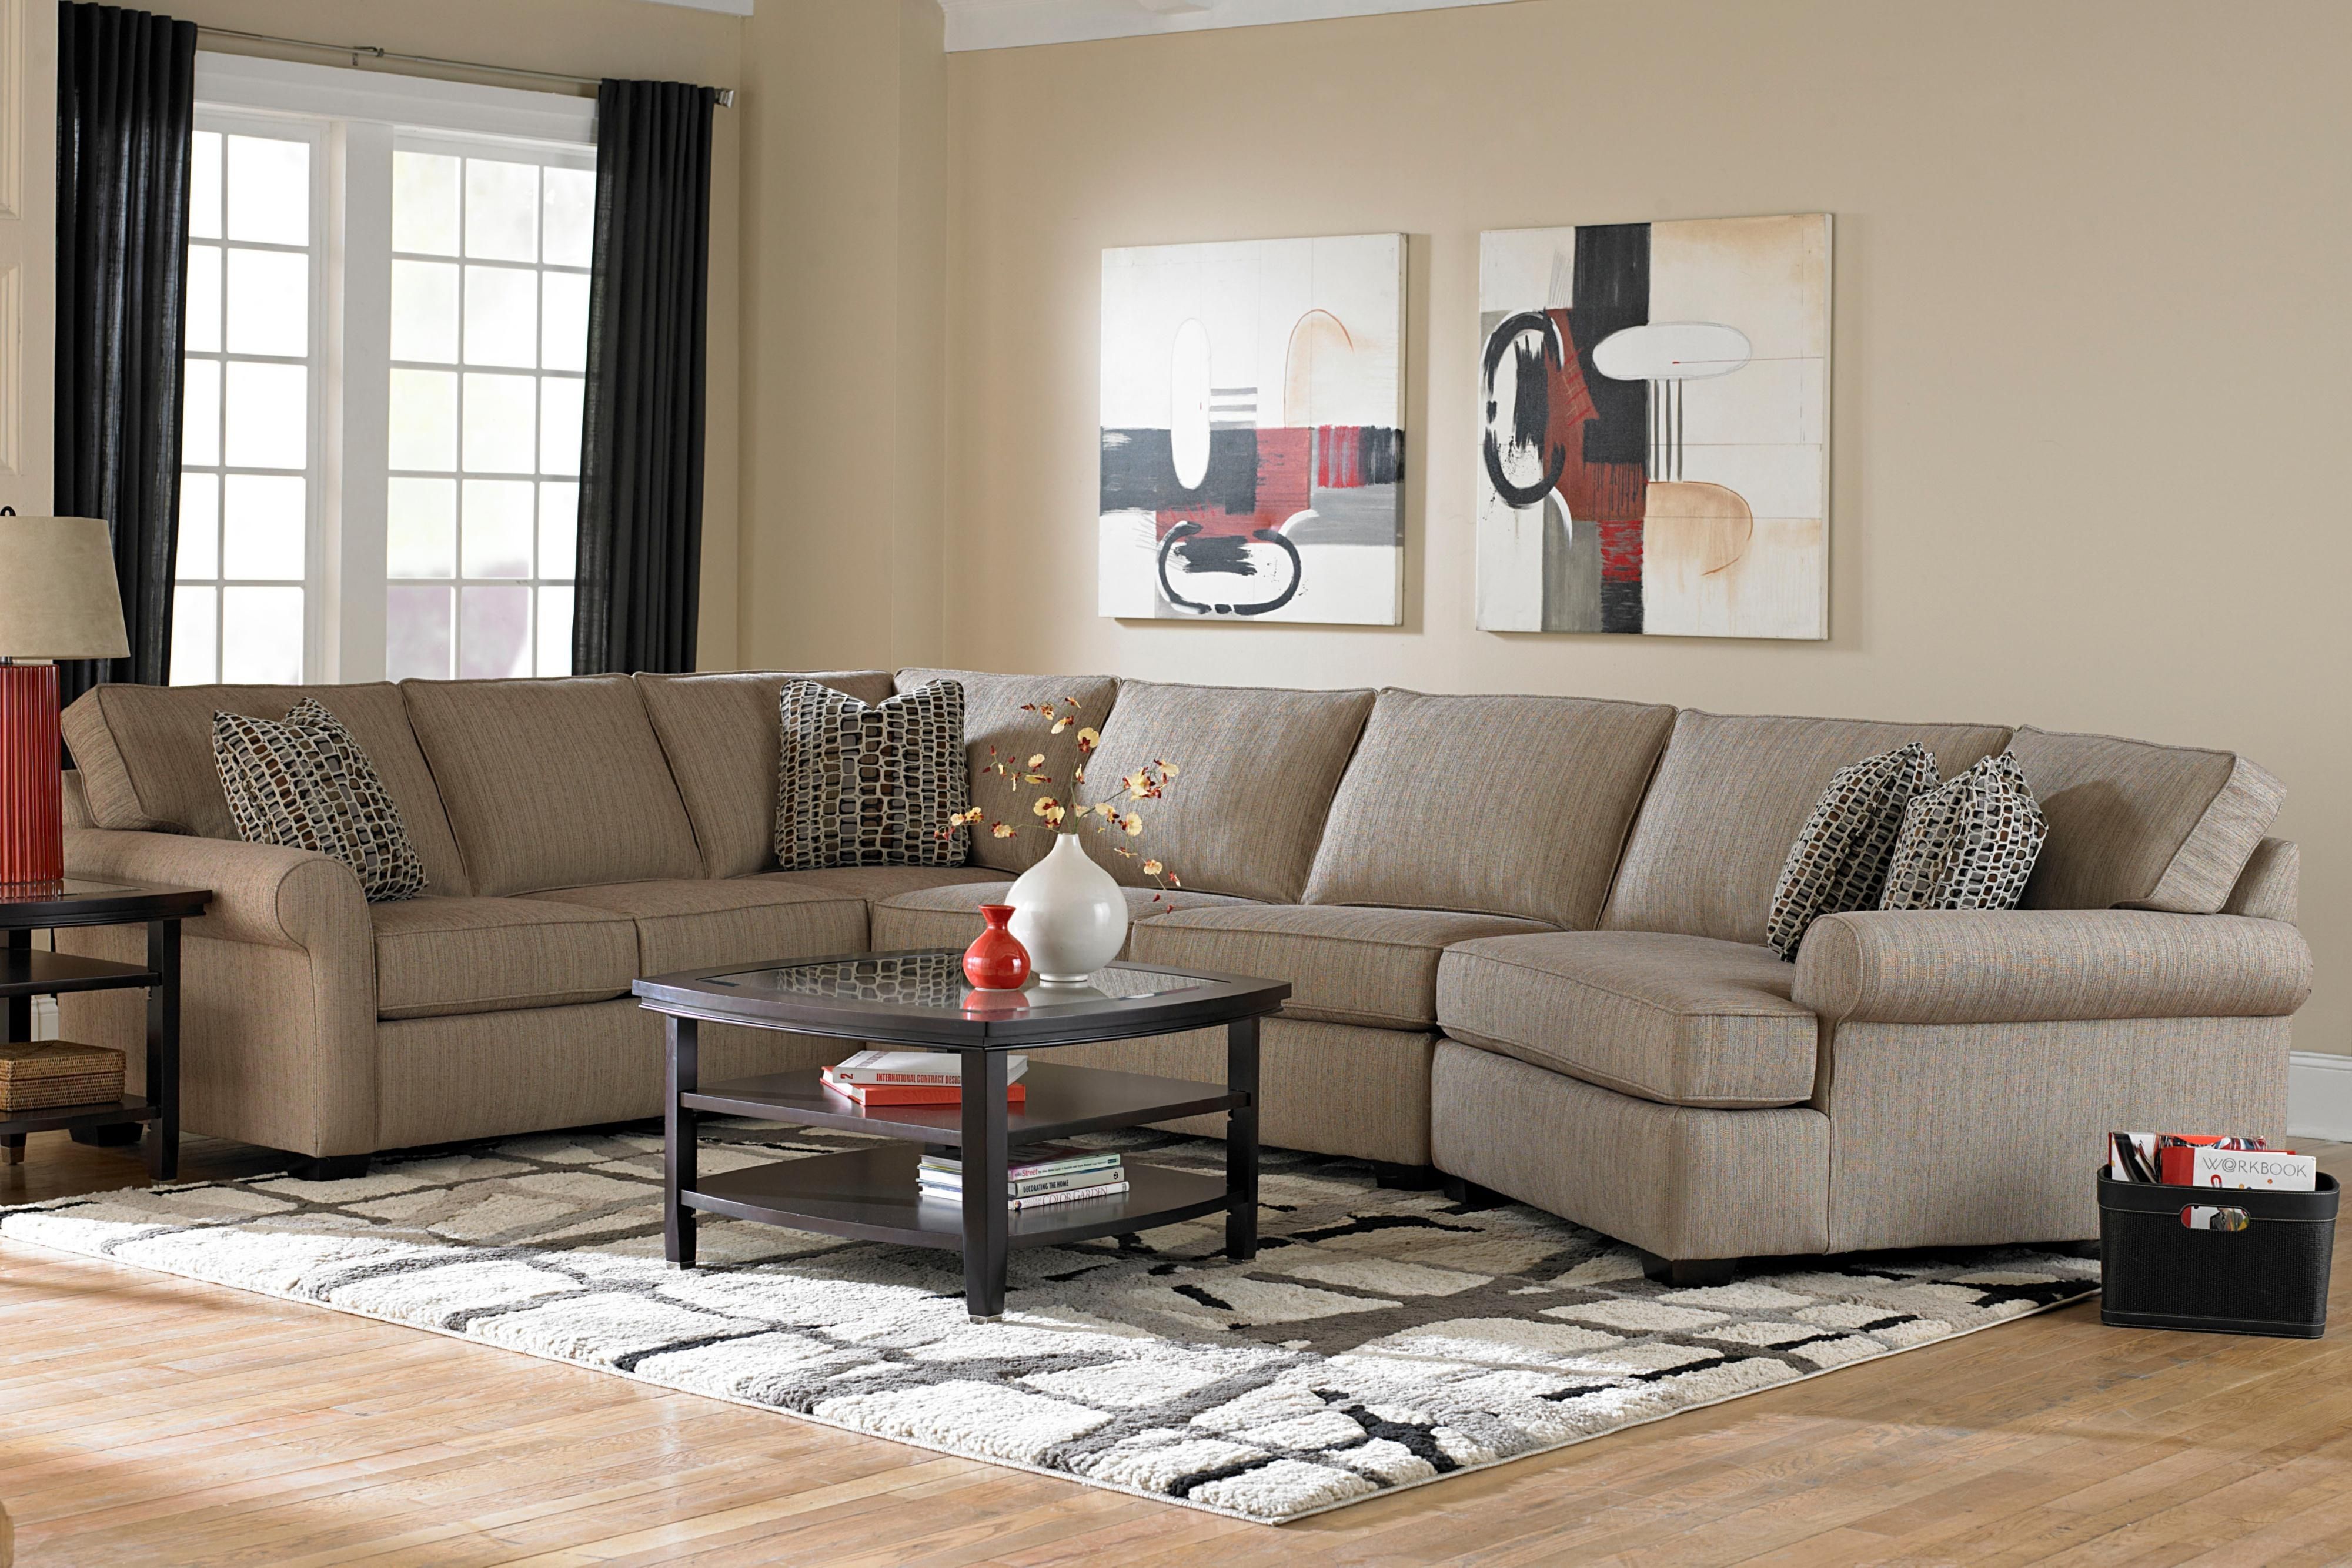 Most Recent Little Rock Ar Sectional Sofas For Furniture: Plenty Of Room For The Whole Family With Furniture (View 12 of 20)